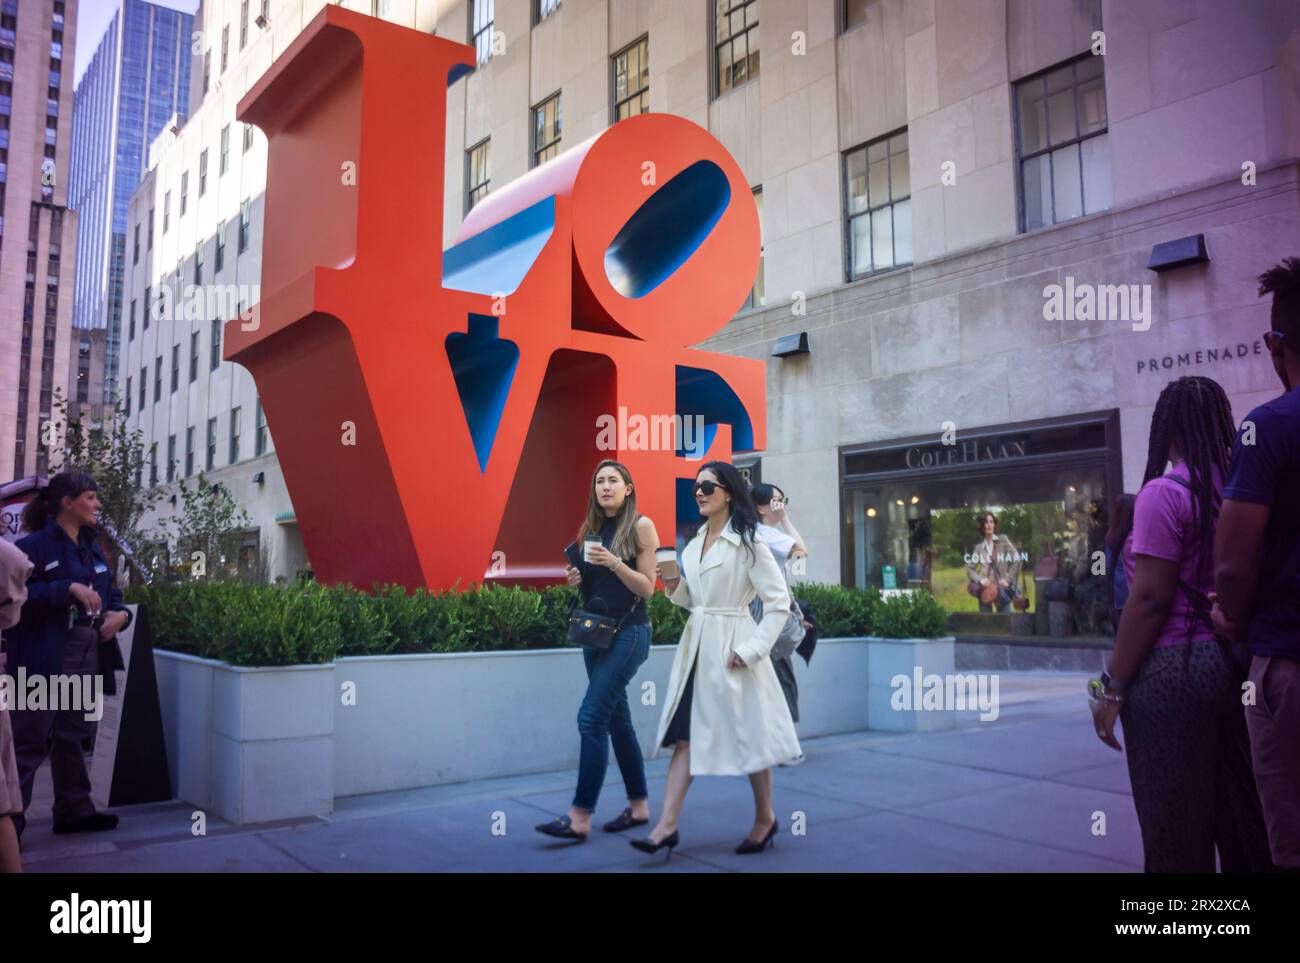 The public art sculpture 'Love' by Robert Indiana (1928-2018) is seen on display in Rockefeller Center in New York on Wednesday, September 20, 2023. The iconic 12 foot high sculpture at the entrance to the Channel Gardens as well as “ONE through ZERO (The Ten Numbers)” (1980-2001) and 193 flags with images from Indiana’s Peace Paintings will be on display until October 23, 2023.(© Richard B. Levine) Stock Photo